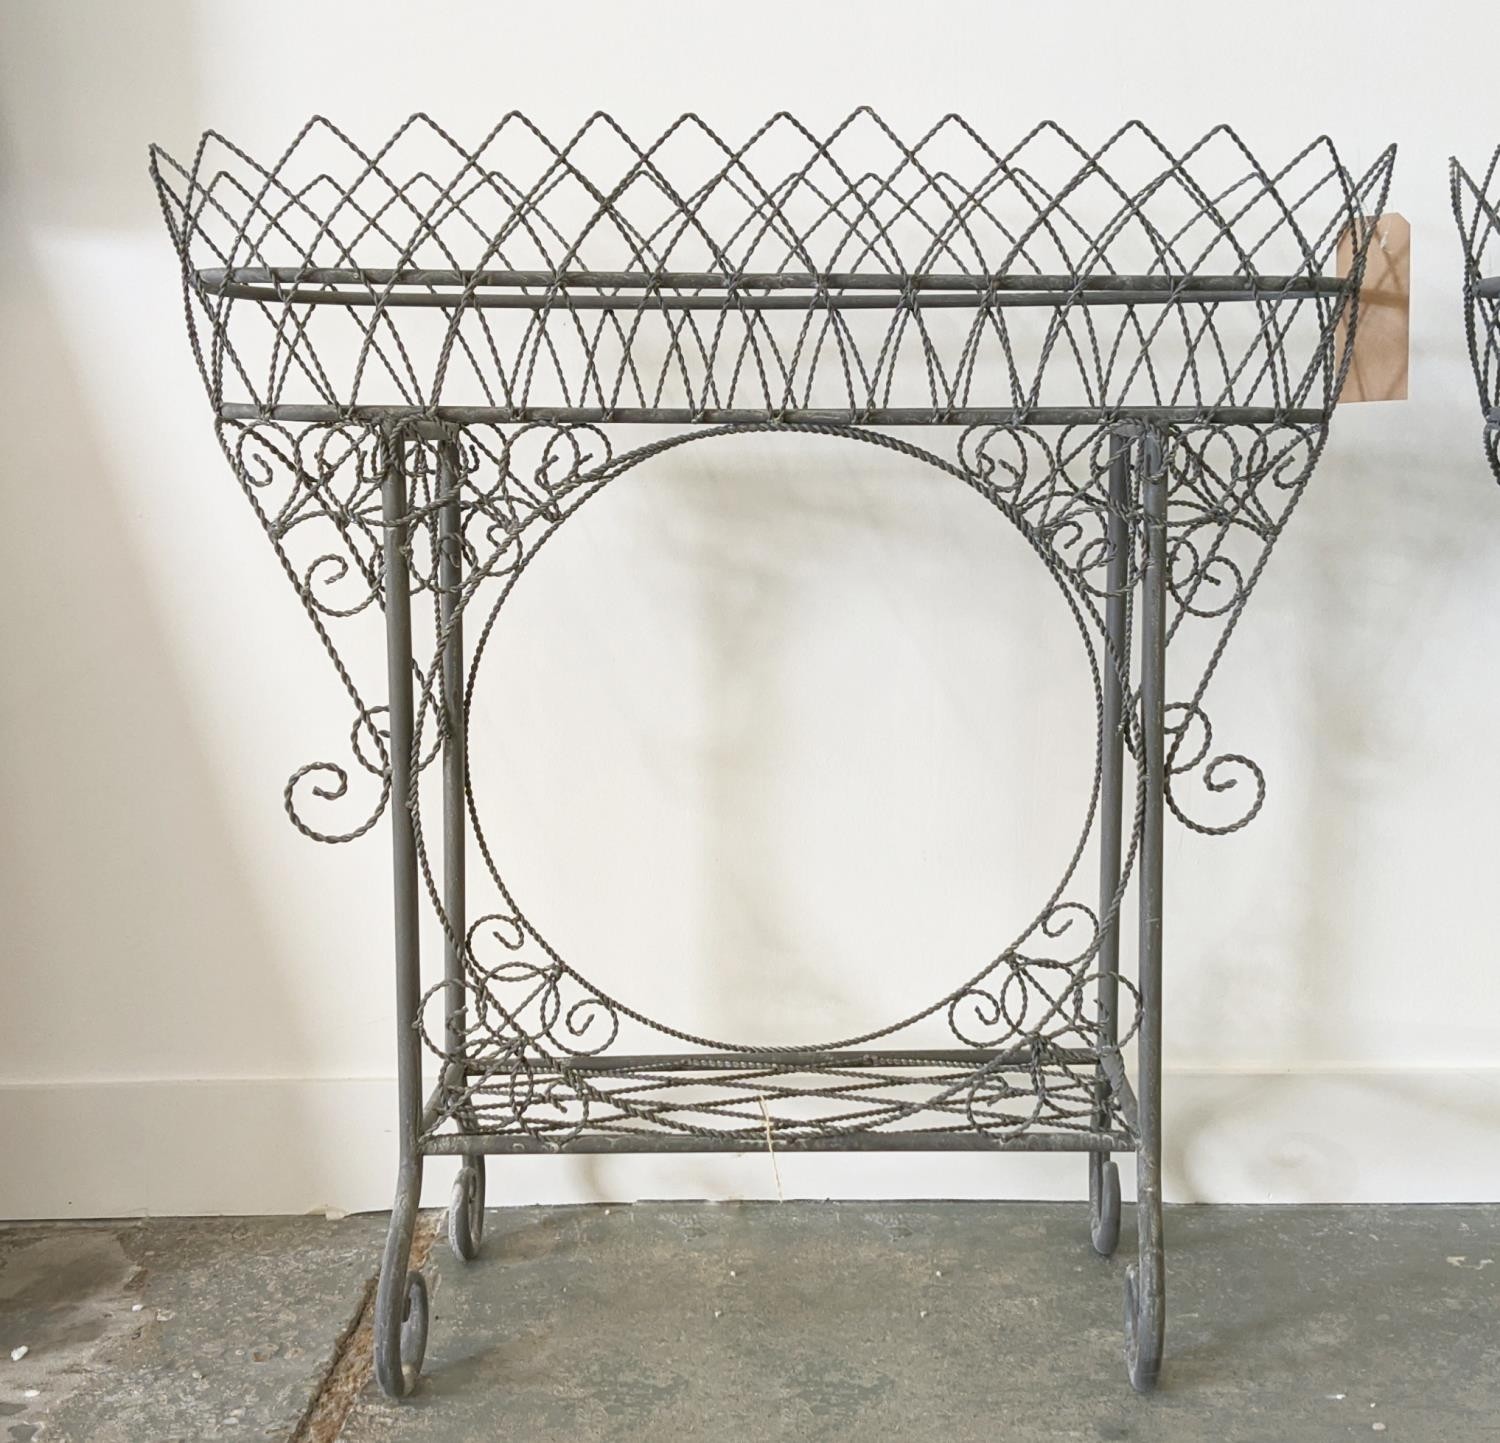 WIRE WORK PLANT STANDS, a pair, 88cm H x 85cm L x 30cm D. (2) - Image 3 of 4